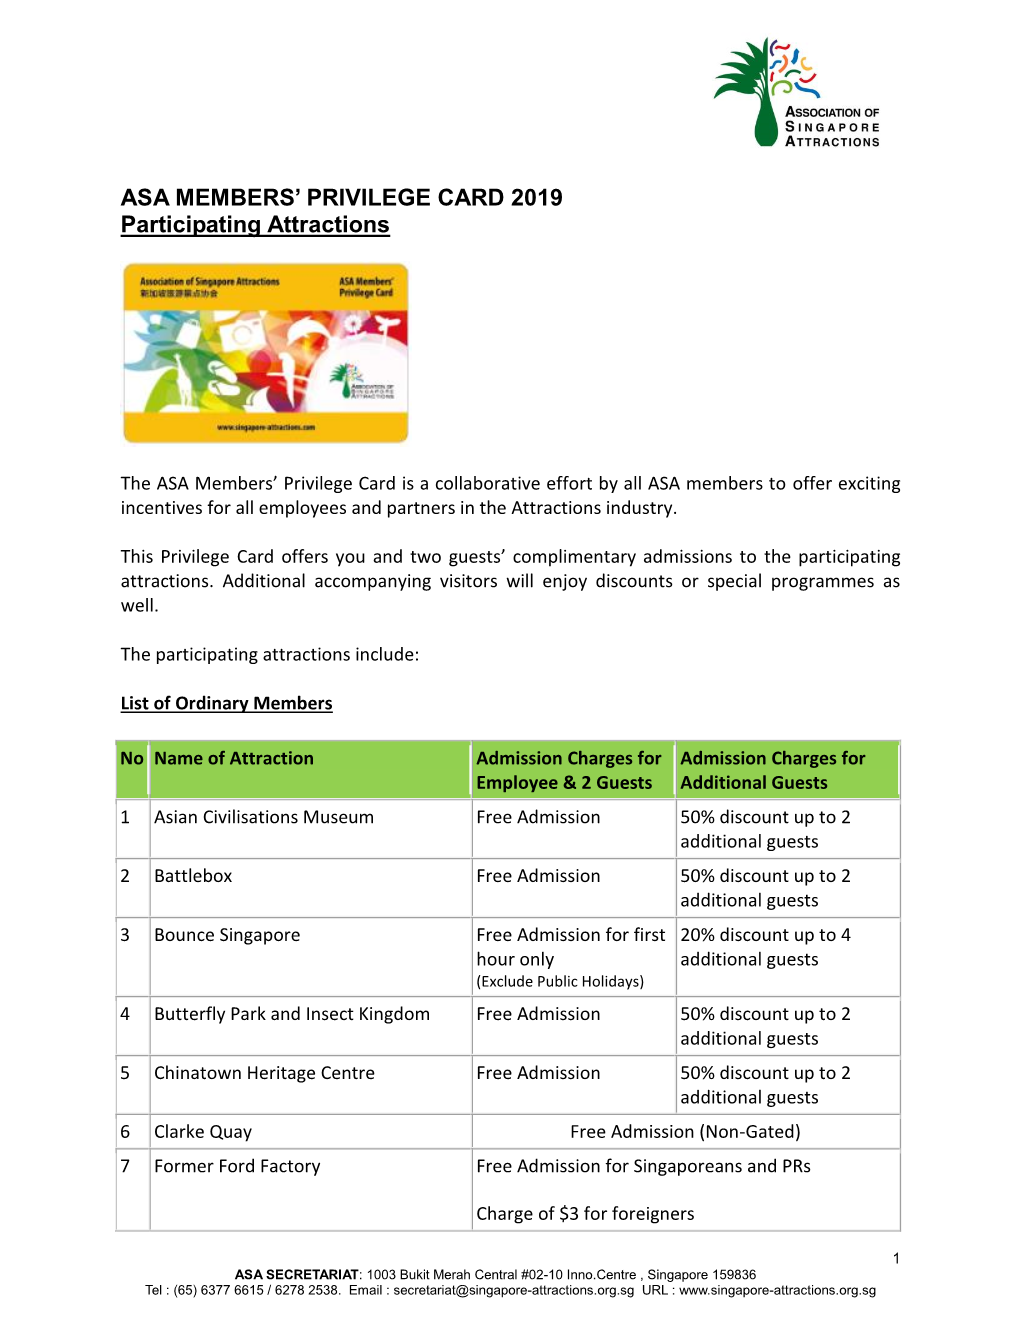 ASA MEMBERS' PRIVILEGE CARD 2019 Participating Attractions